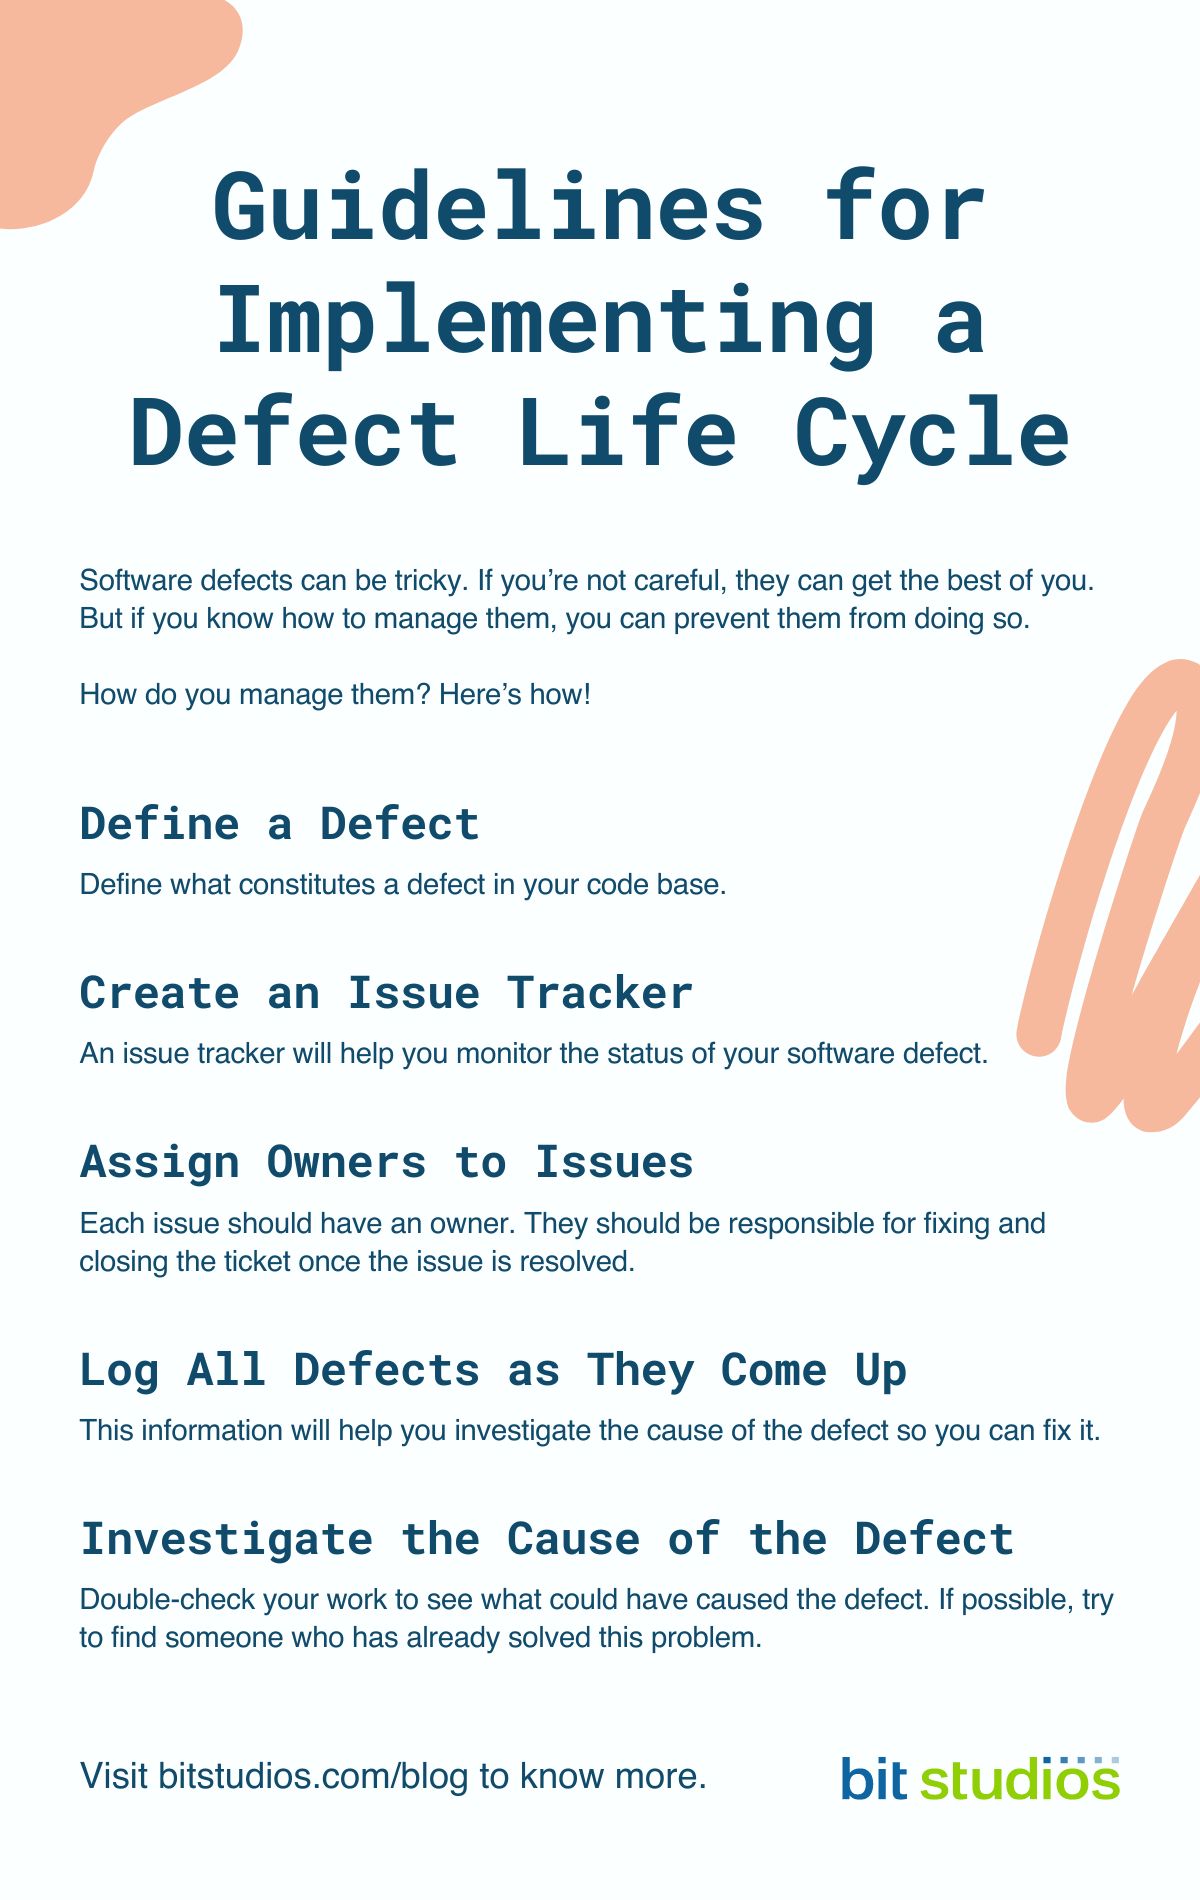 Guidelines for Implementing a Defect Life cycle